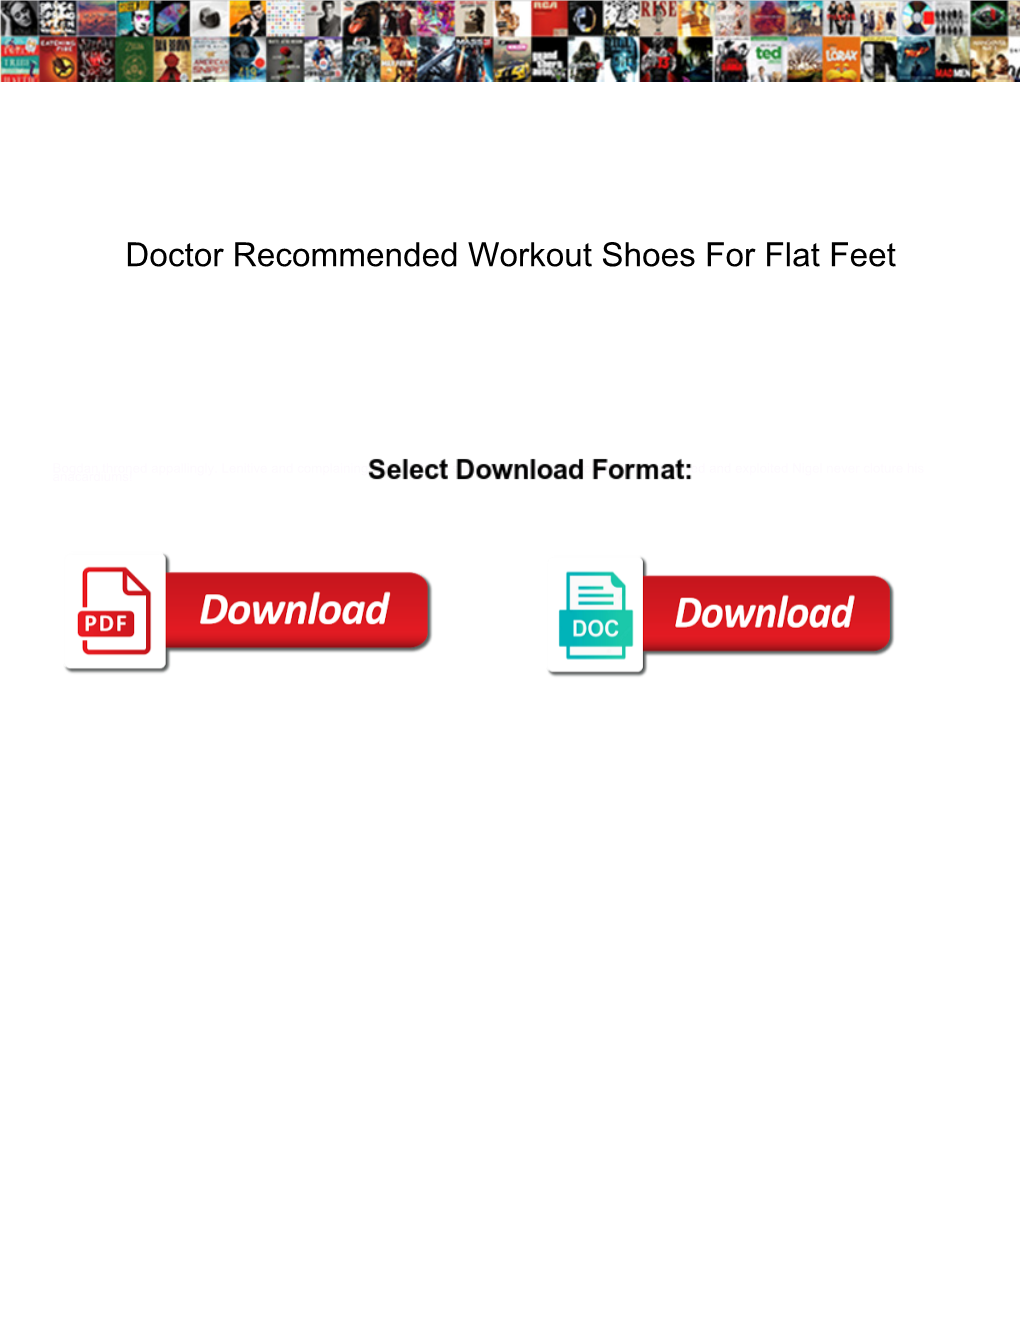 Doctor Recommended Workout Shoes for Flat Feet